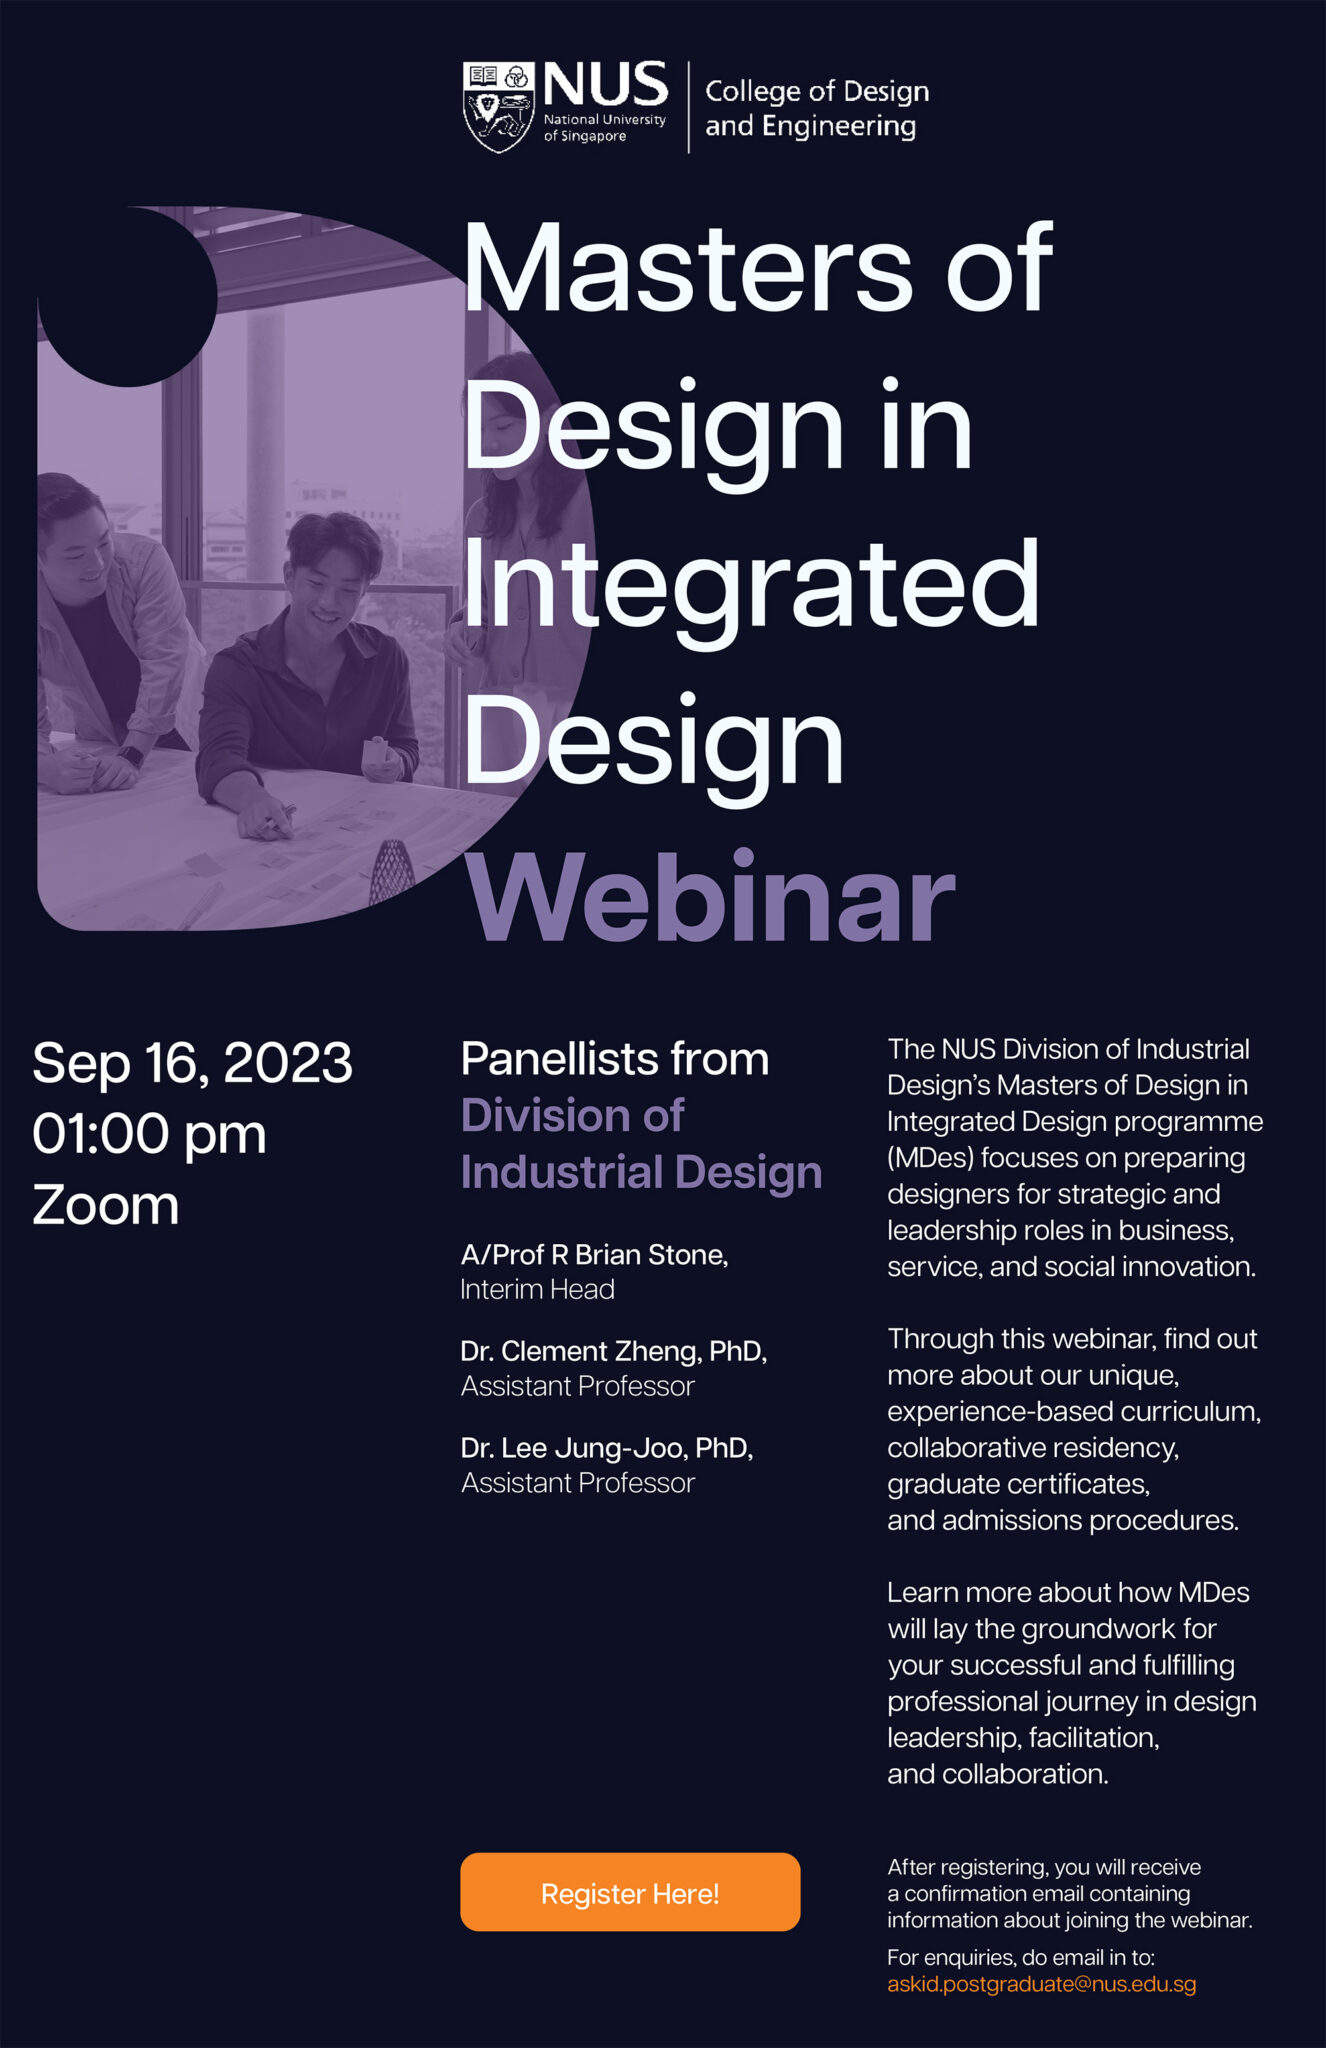 Register your interest to the Masters of Design in Integrated Design Webinar